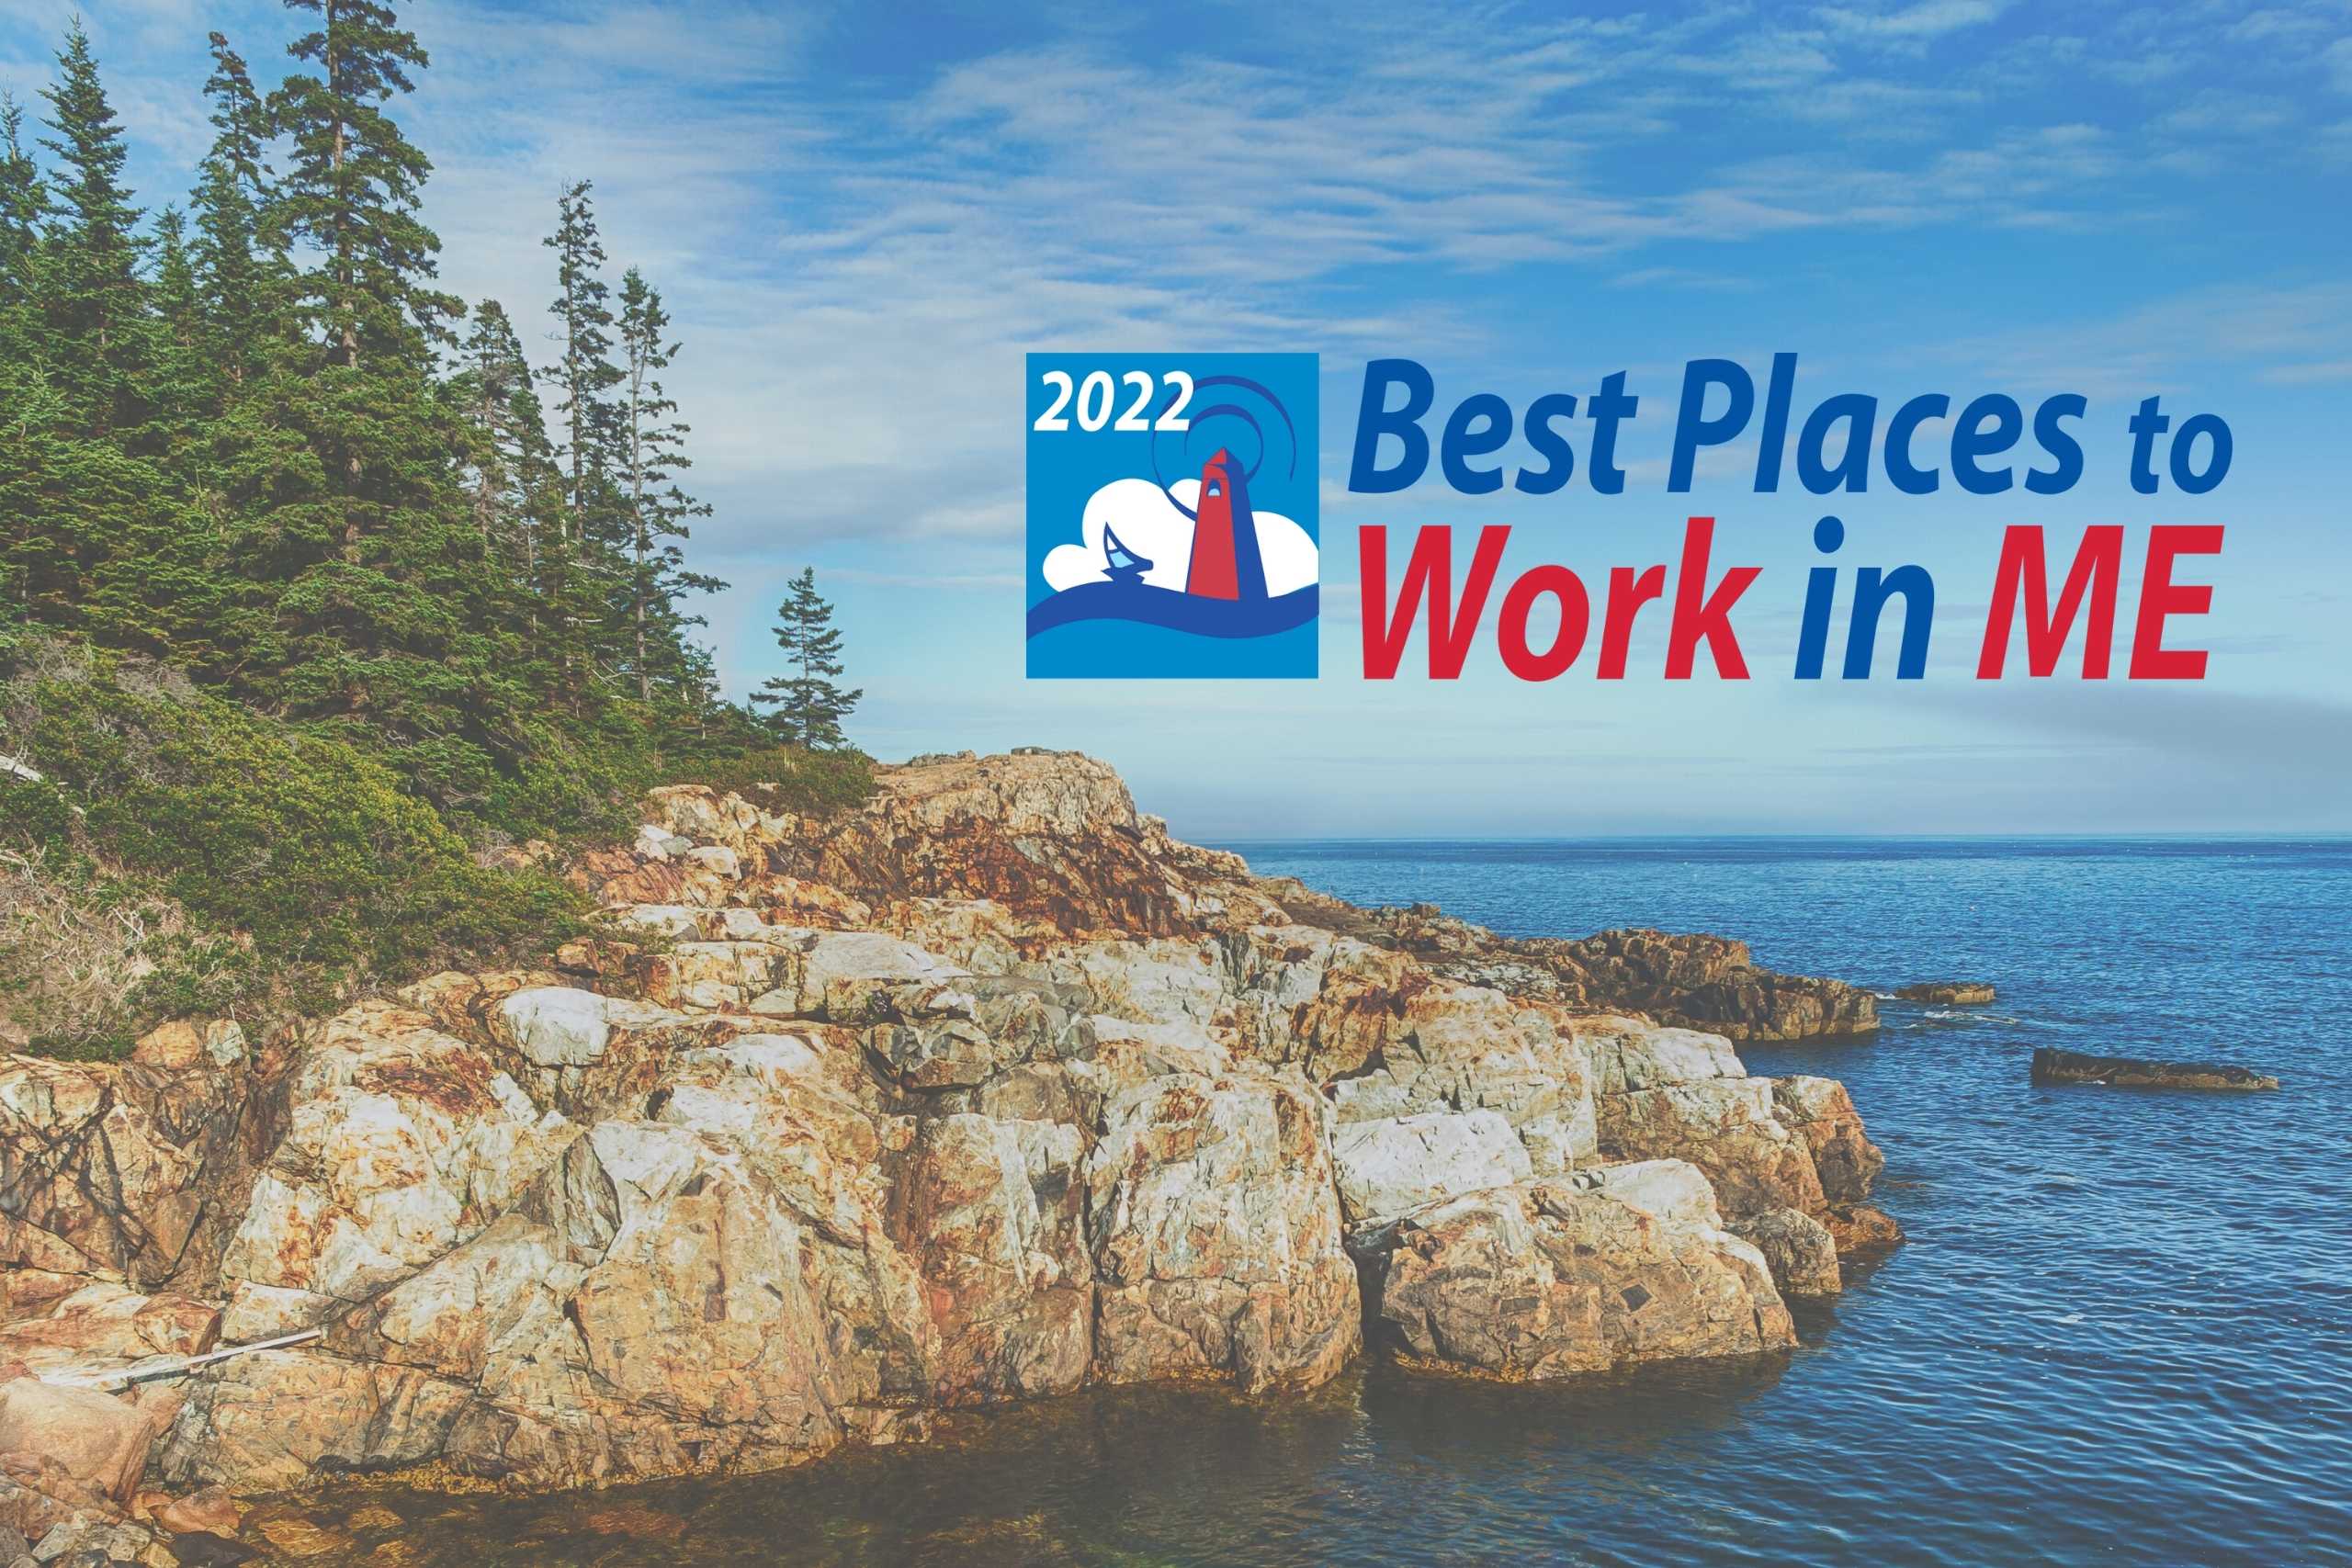 L&H is recognized as one of the 2022 Best Places to Work in Maine